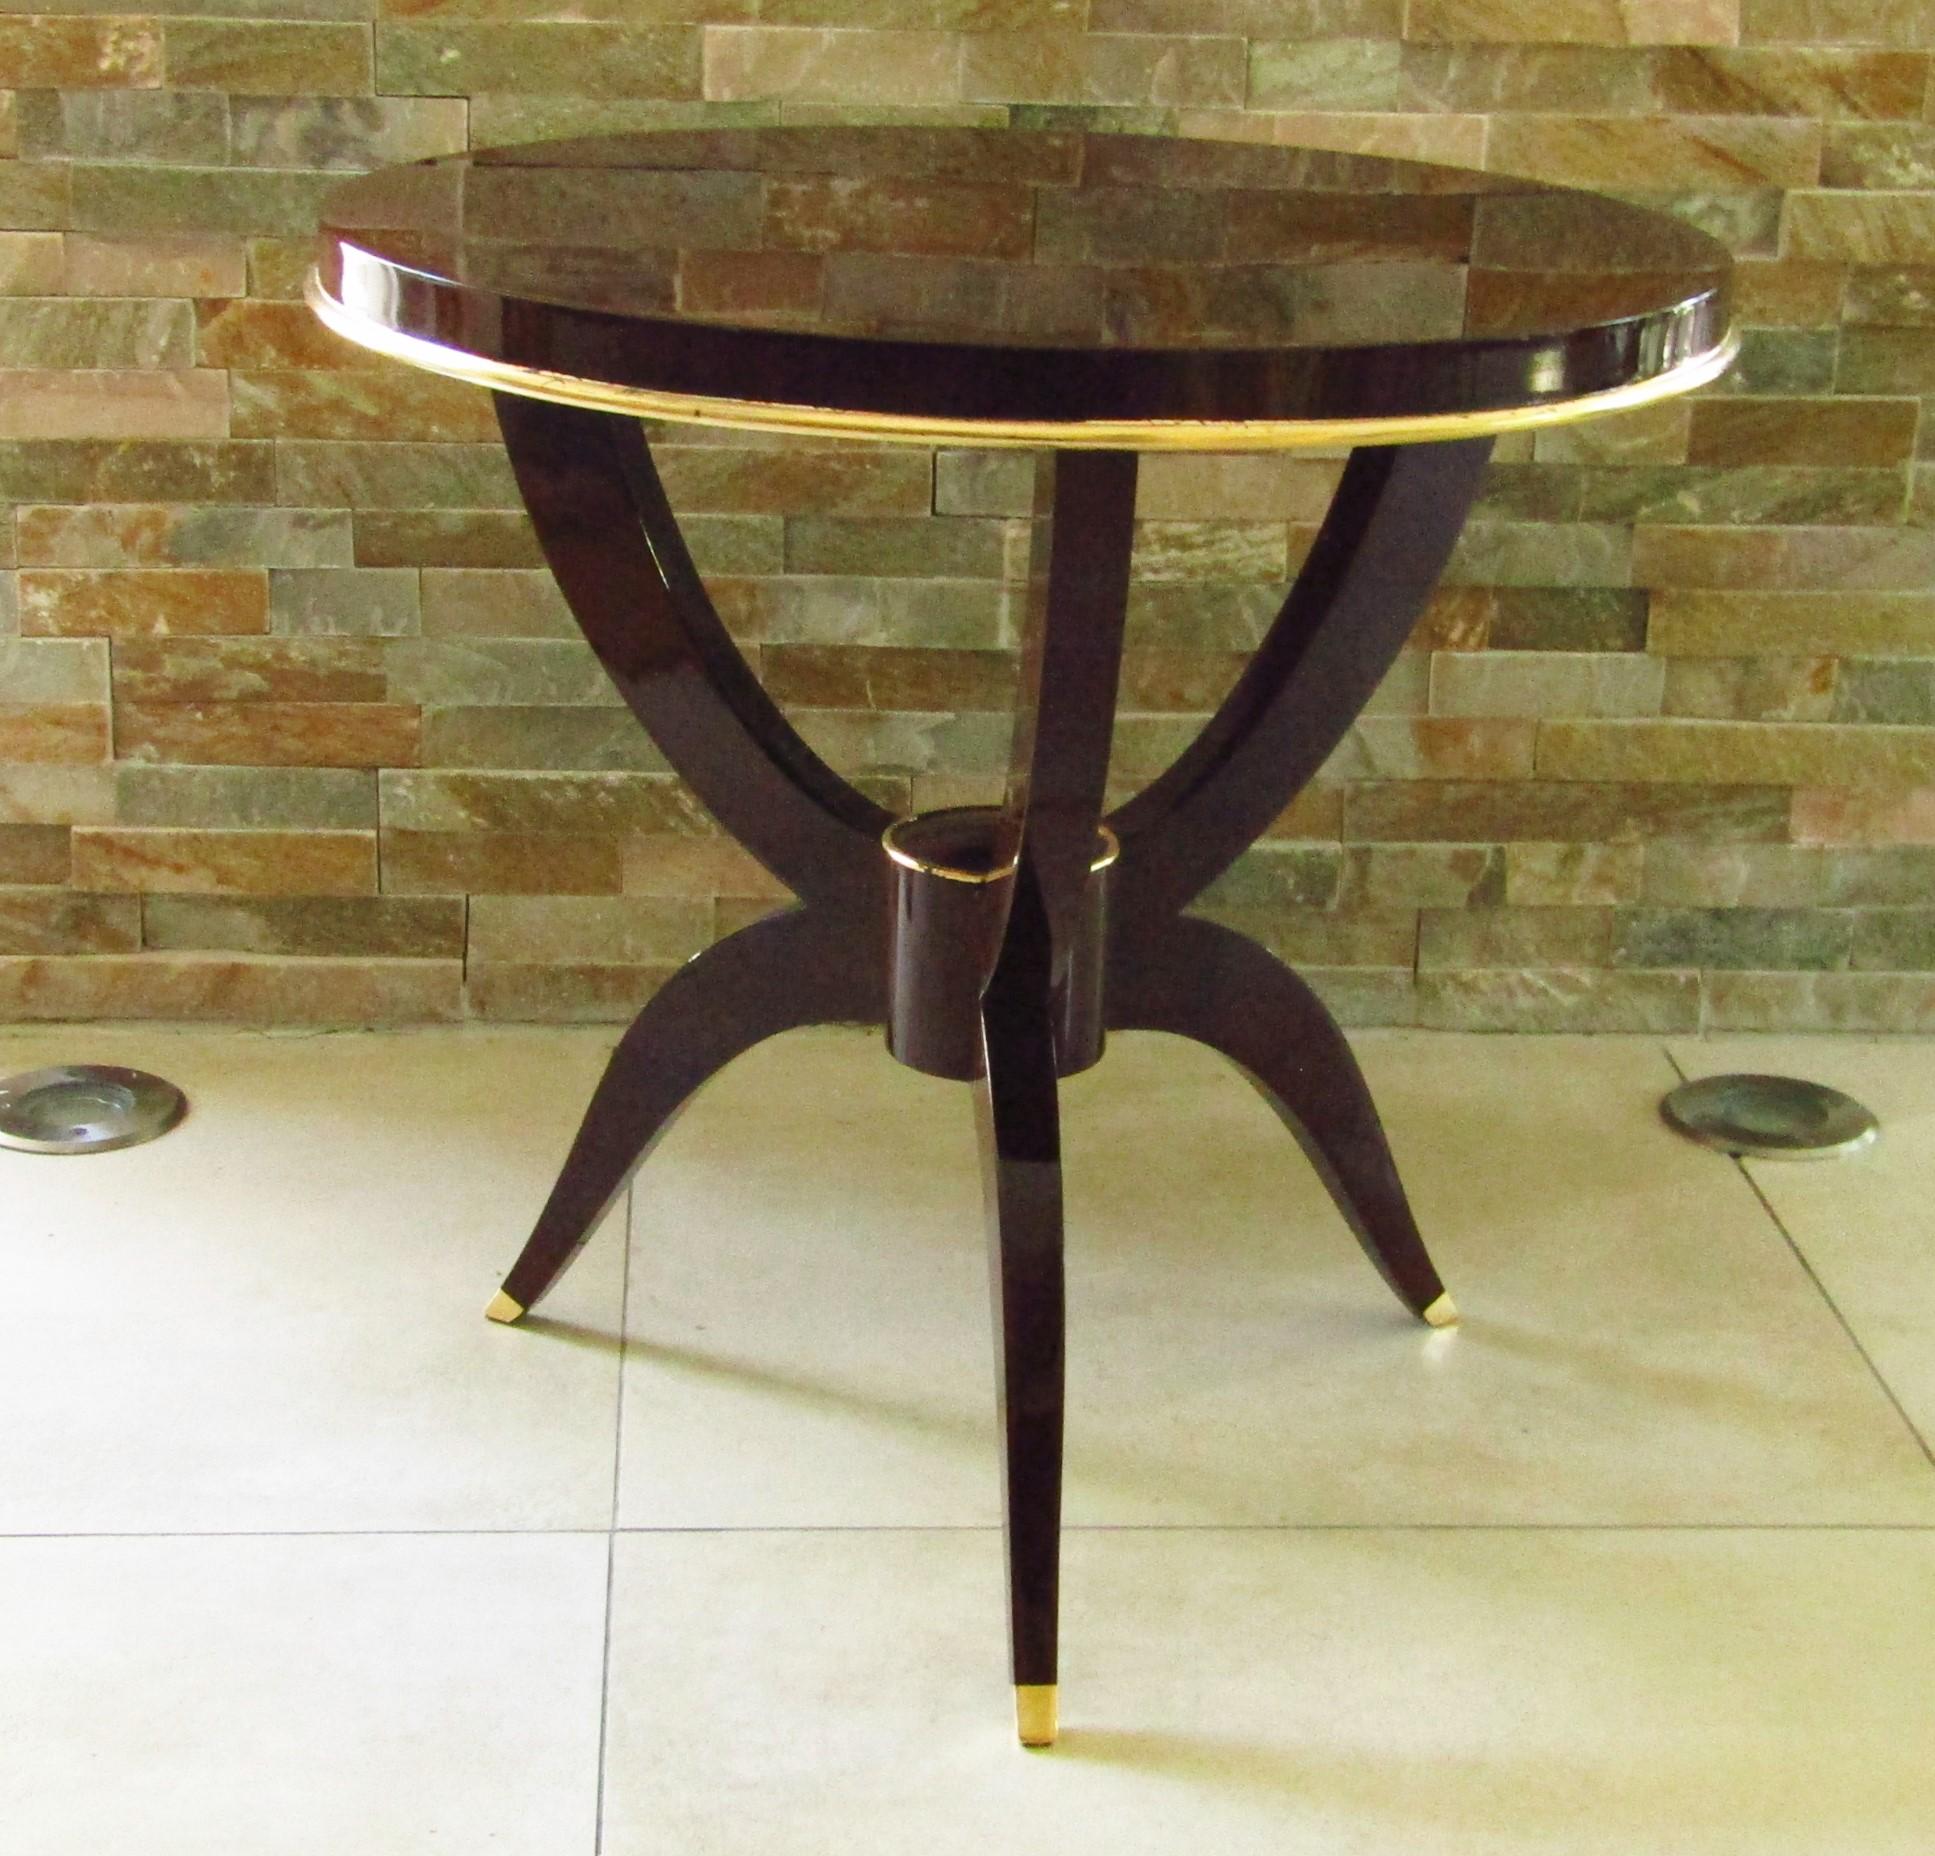 Art Deco side table, France, 1930. Rosewood with gold leaf details. Fully restored with high gloss hand polished lacquer.

Jules Leleu attributed.

